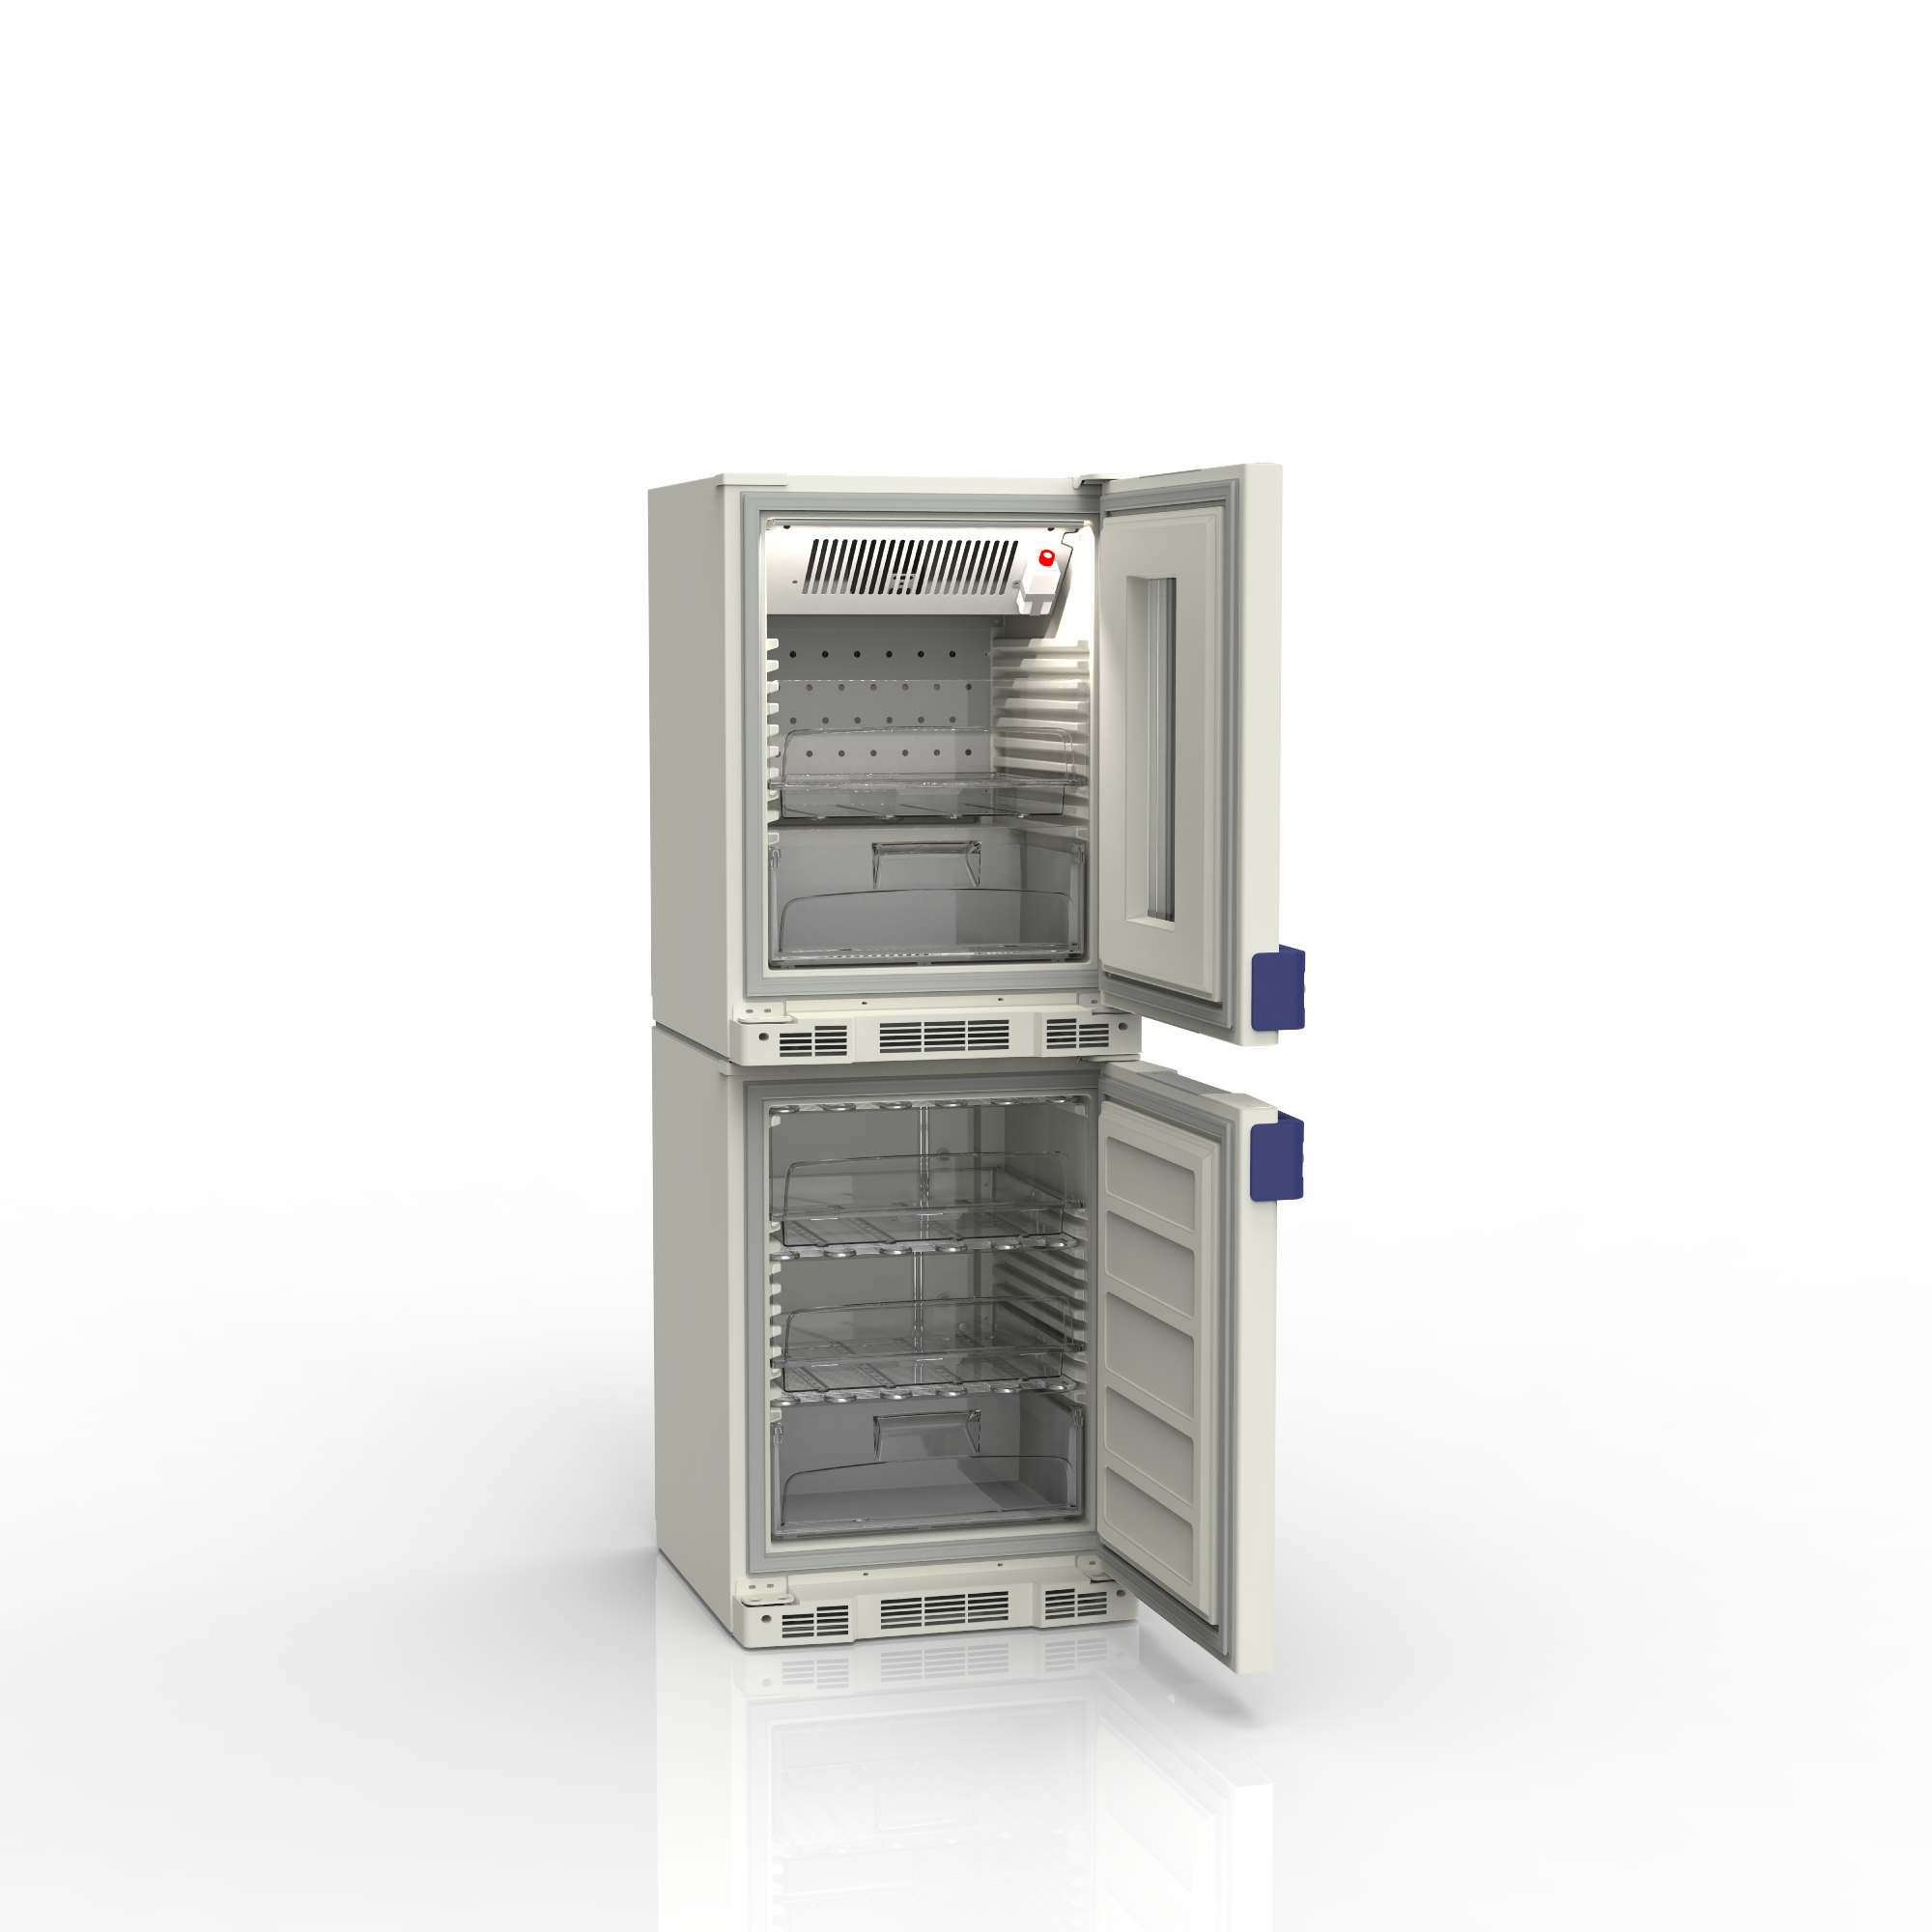 BF261 Refrigerators: Advanced storage solutions for blood and plasma preservation